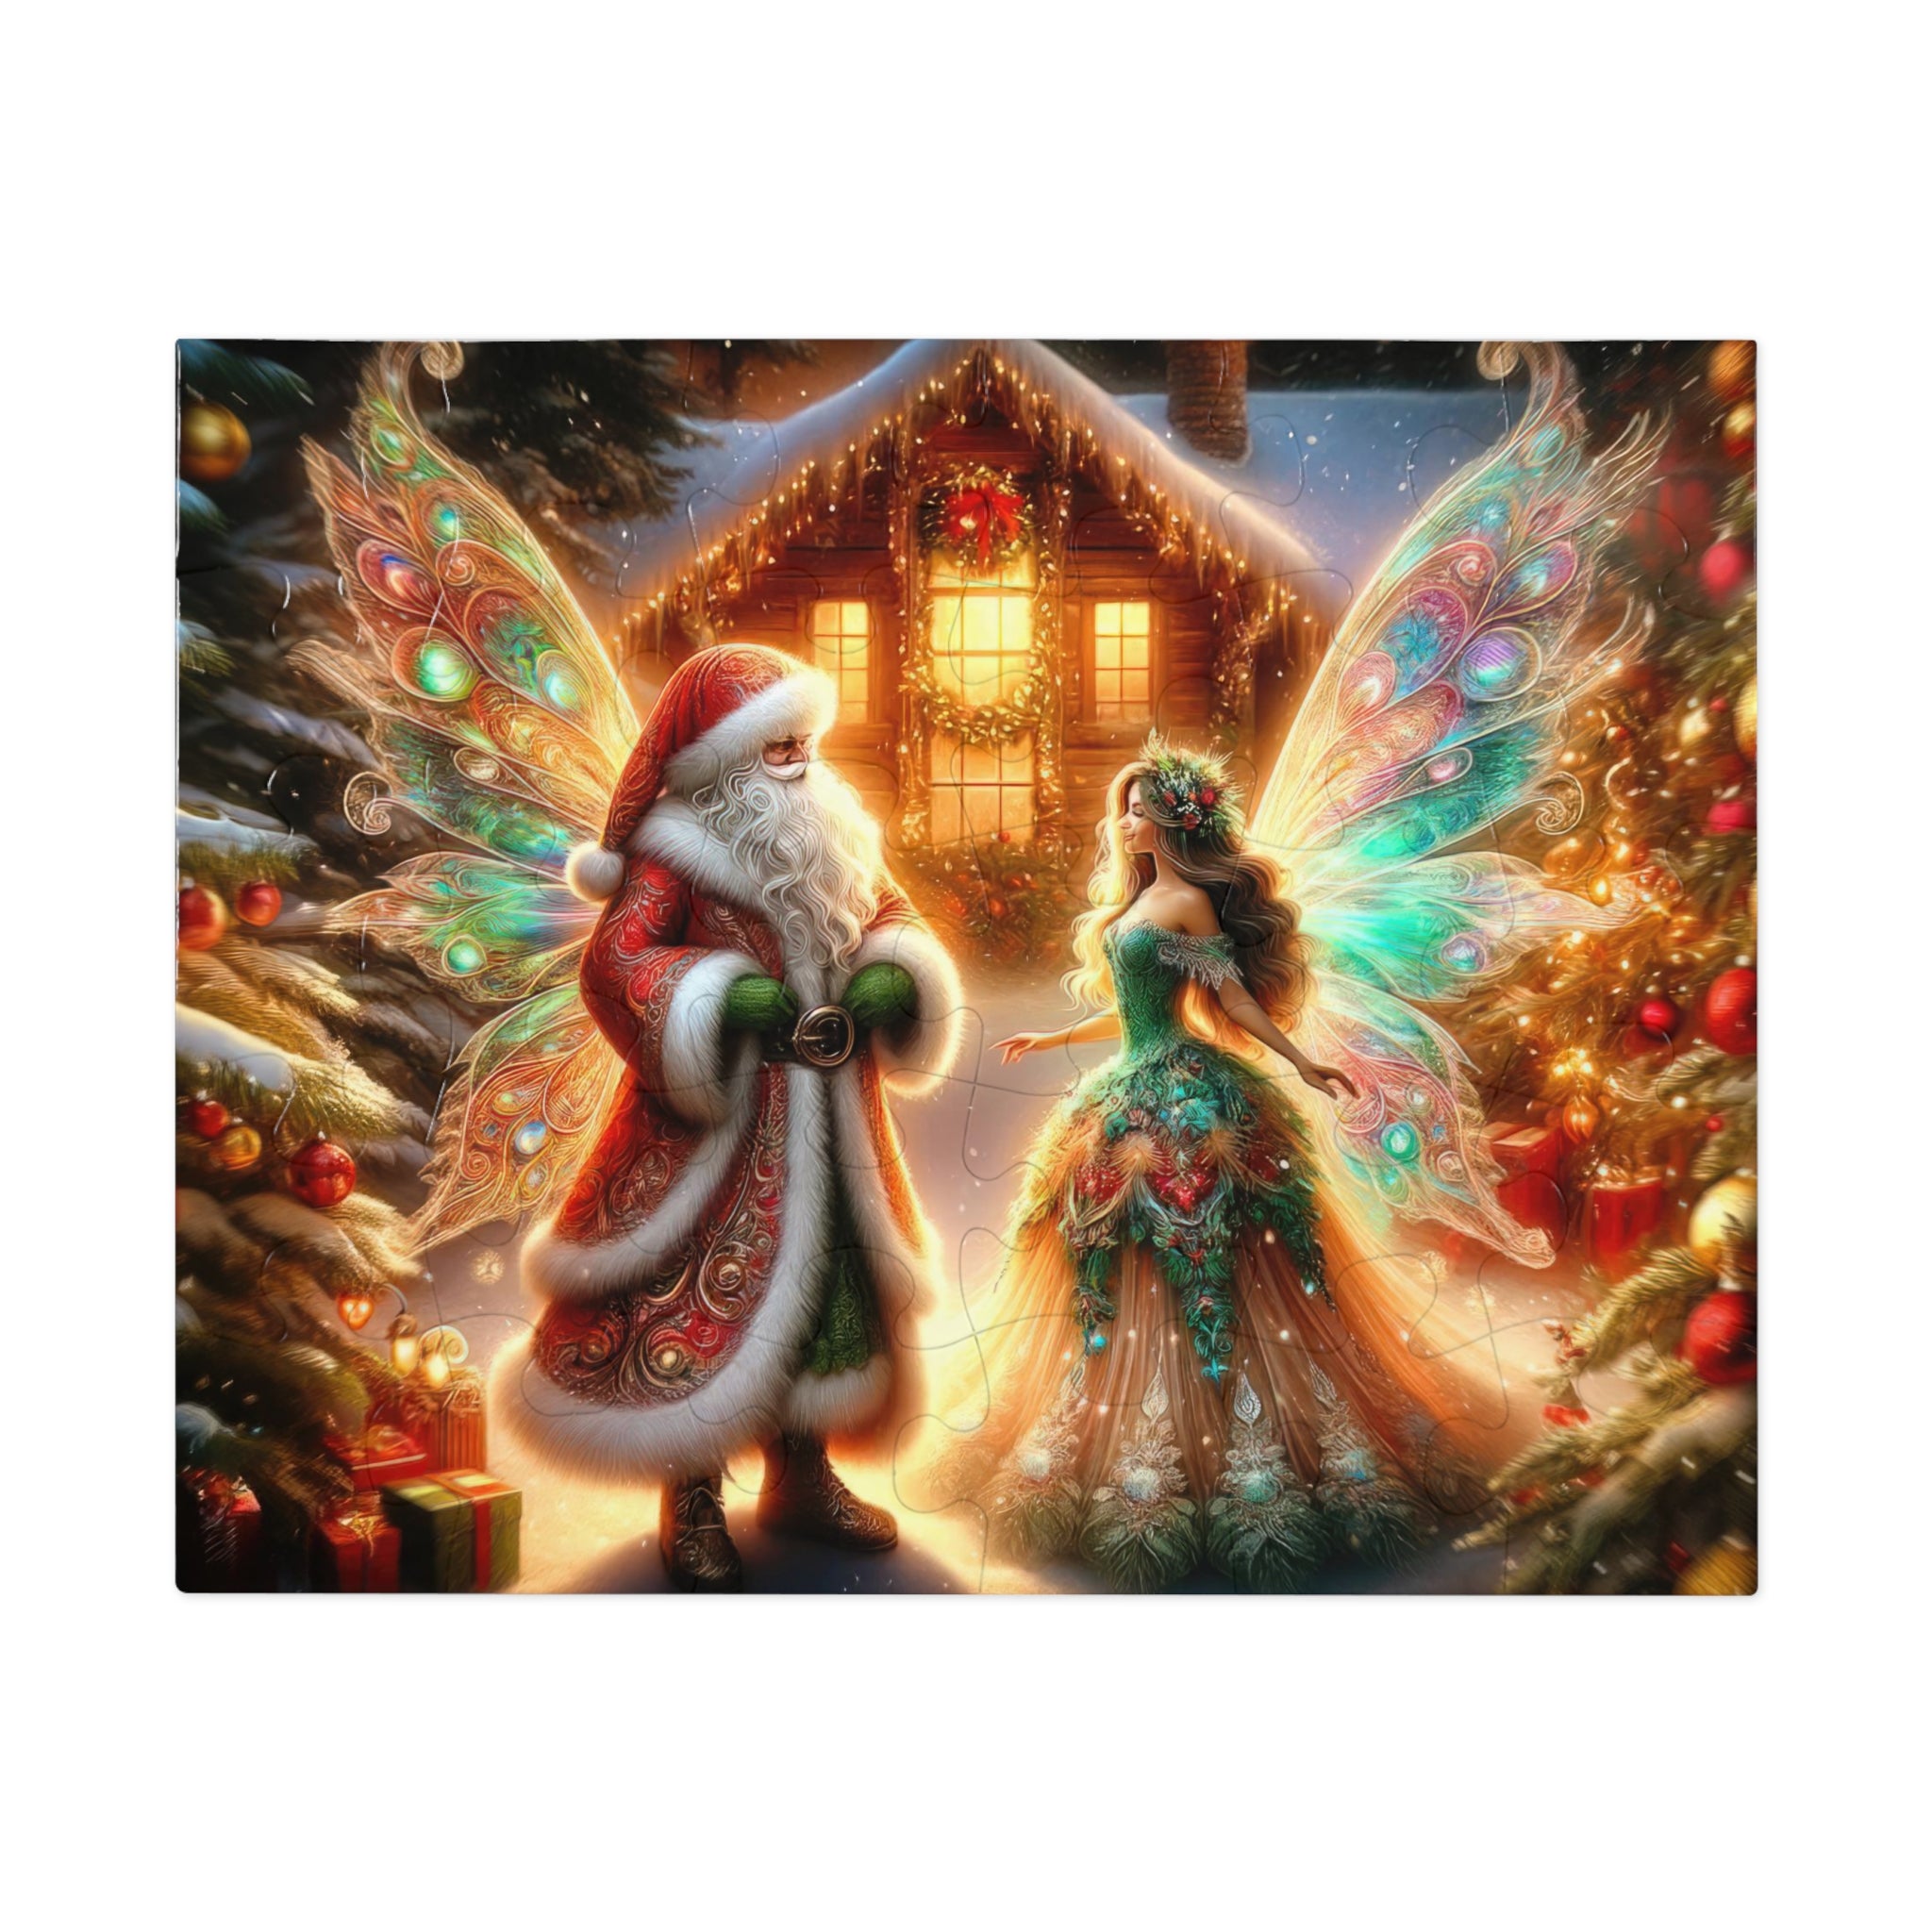 A Fairytale of Frost and Glitter Jigsaw Puzzle